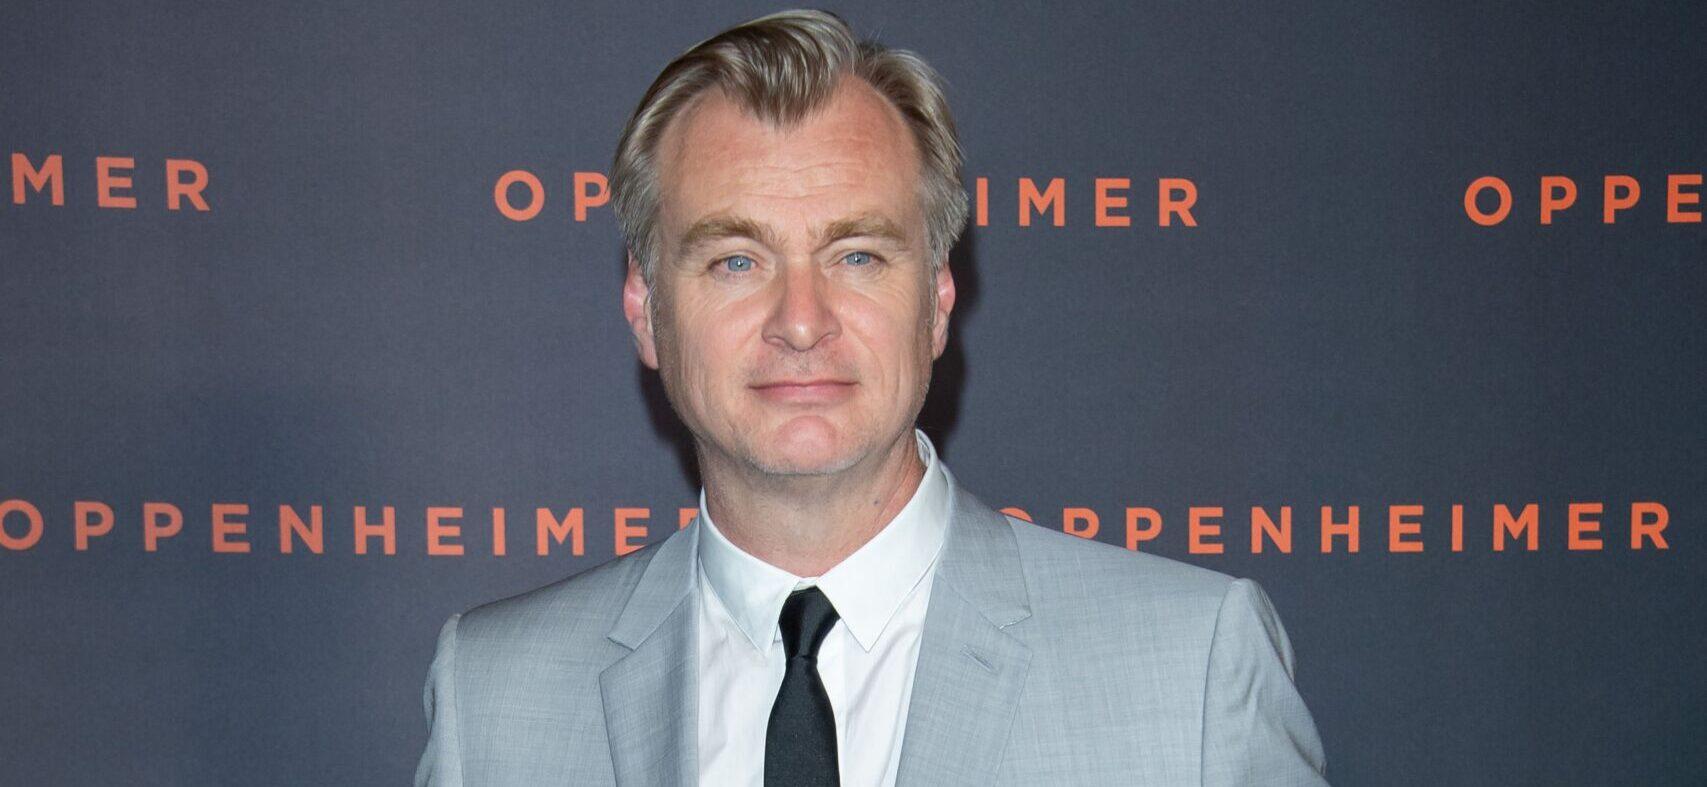 Christopher Nolan Reveals He Would Not Direct A Superhero Film Again After ‘Dark Knight’ Trilogy